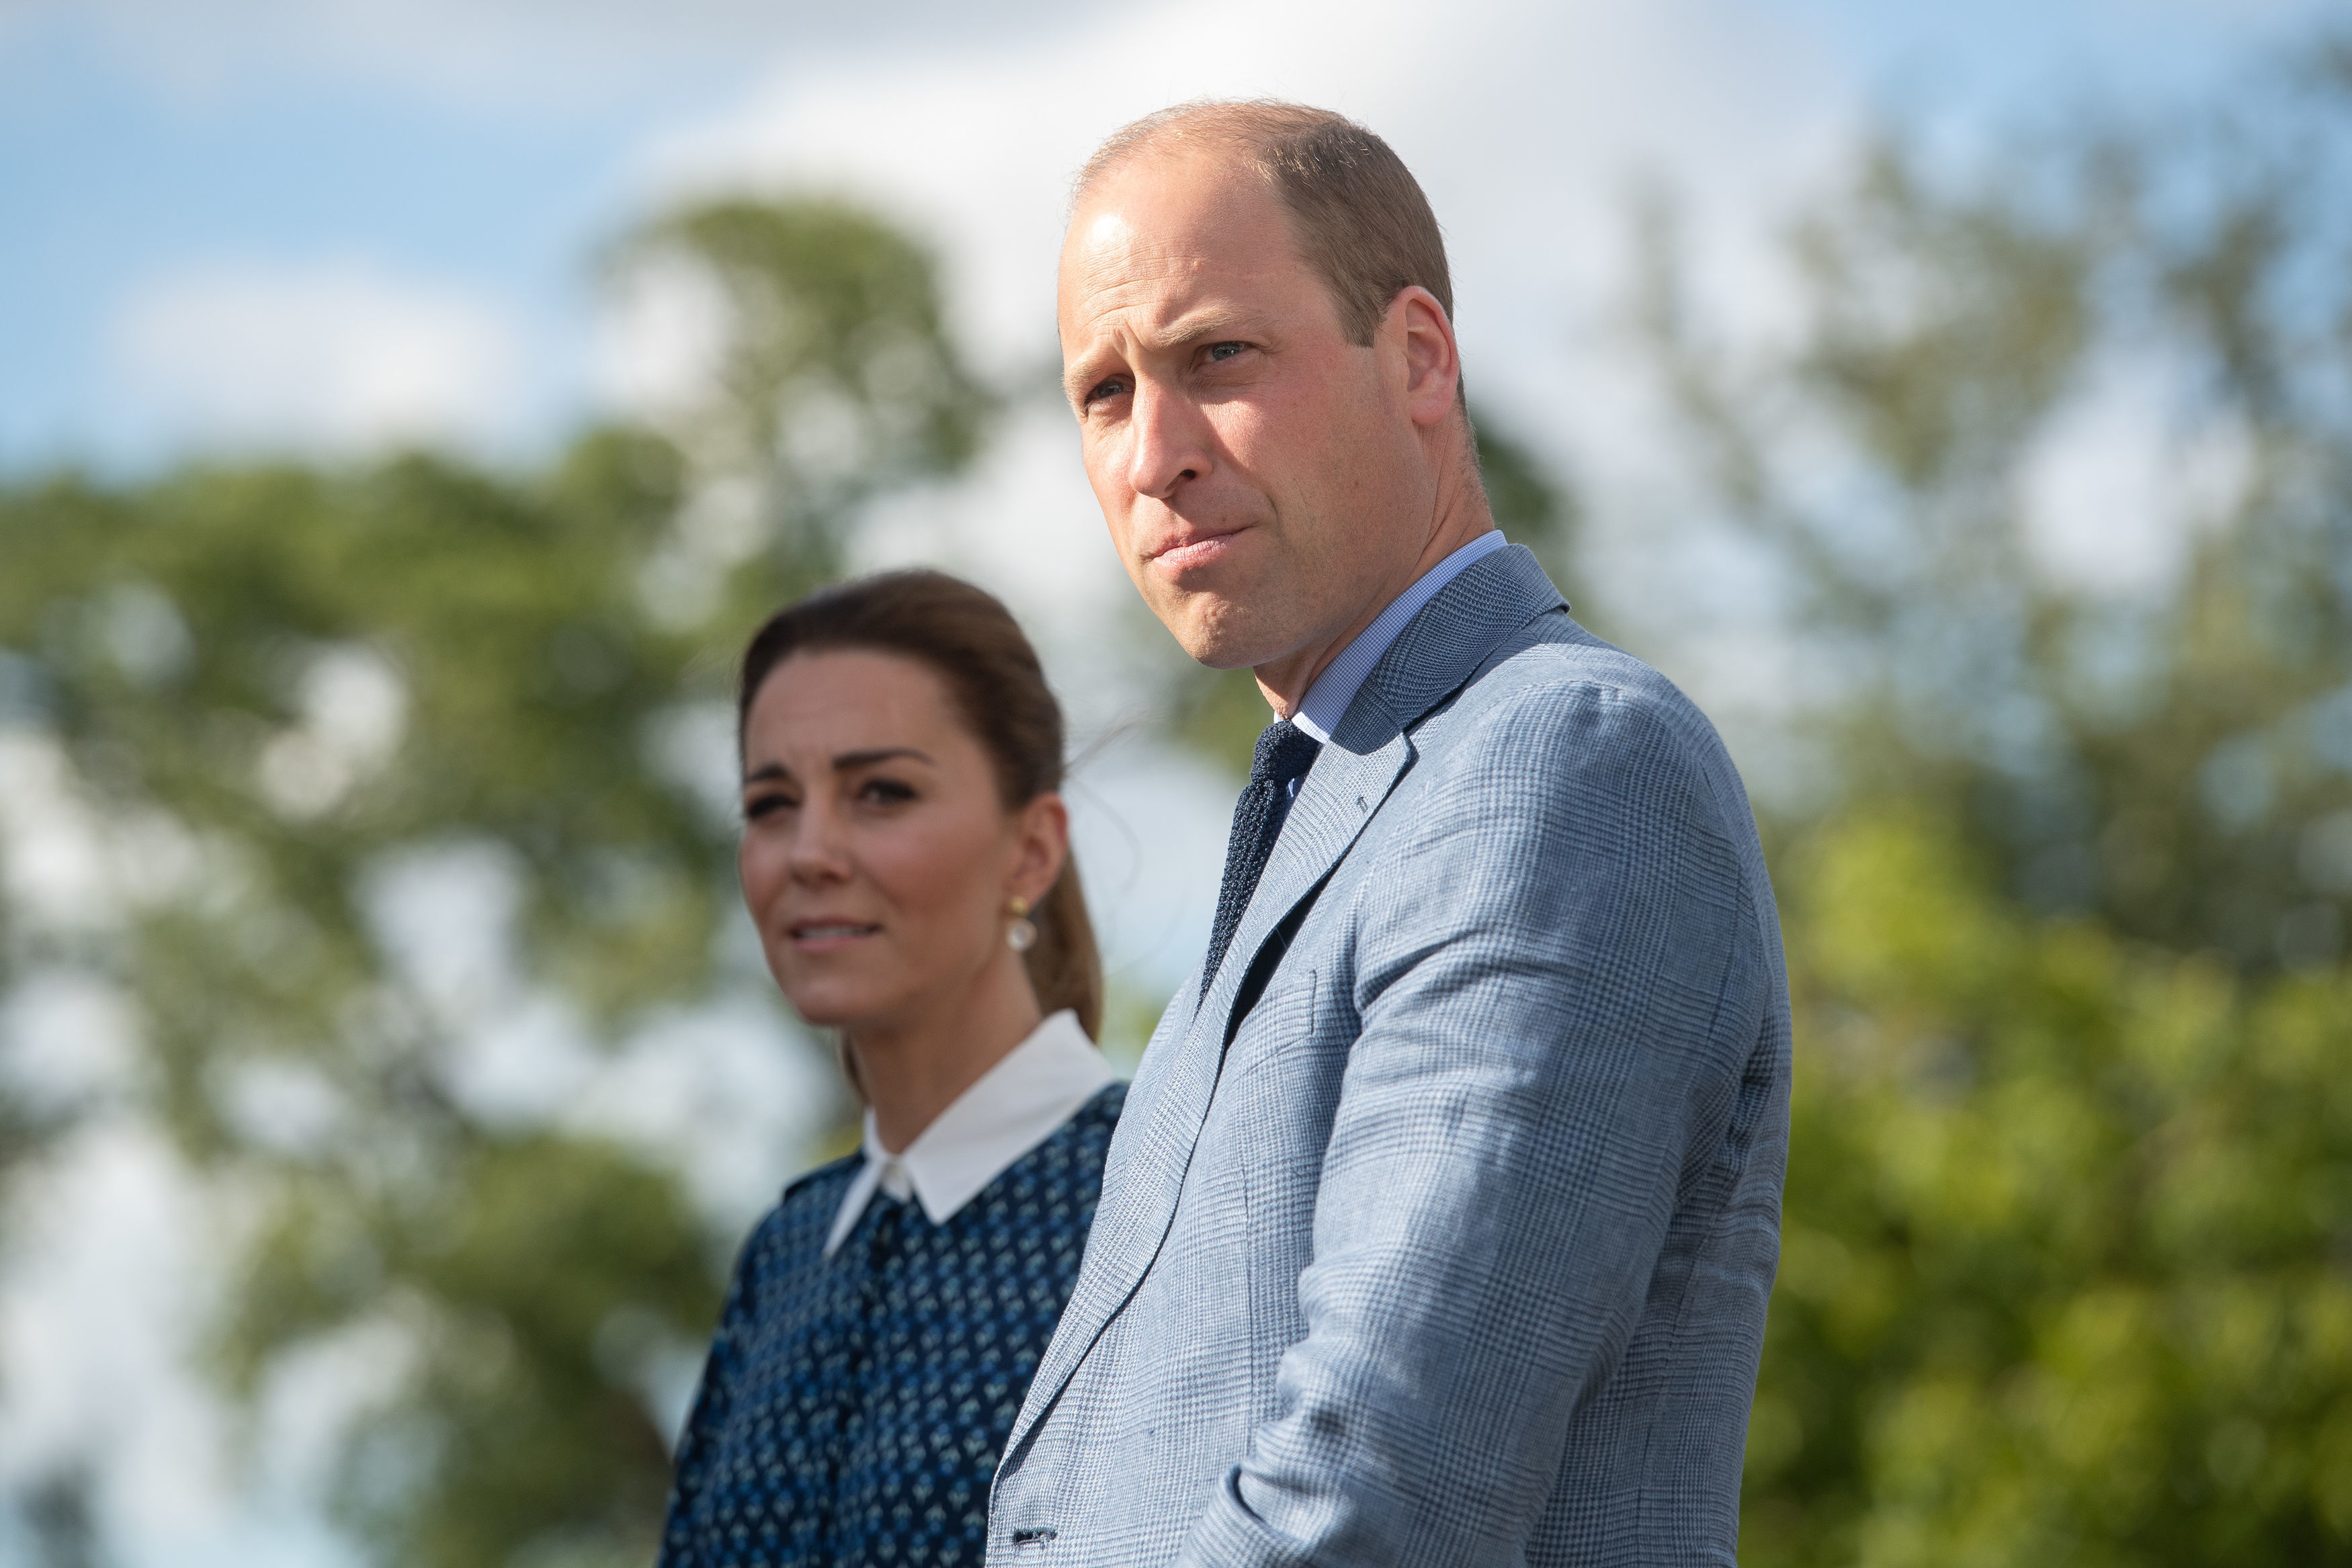 Prince William and Kate Middleton stand together at a an event.